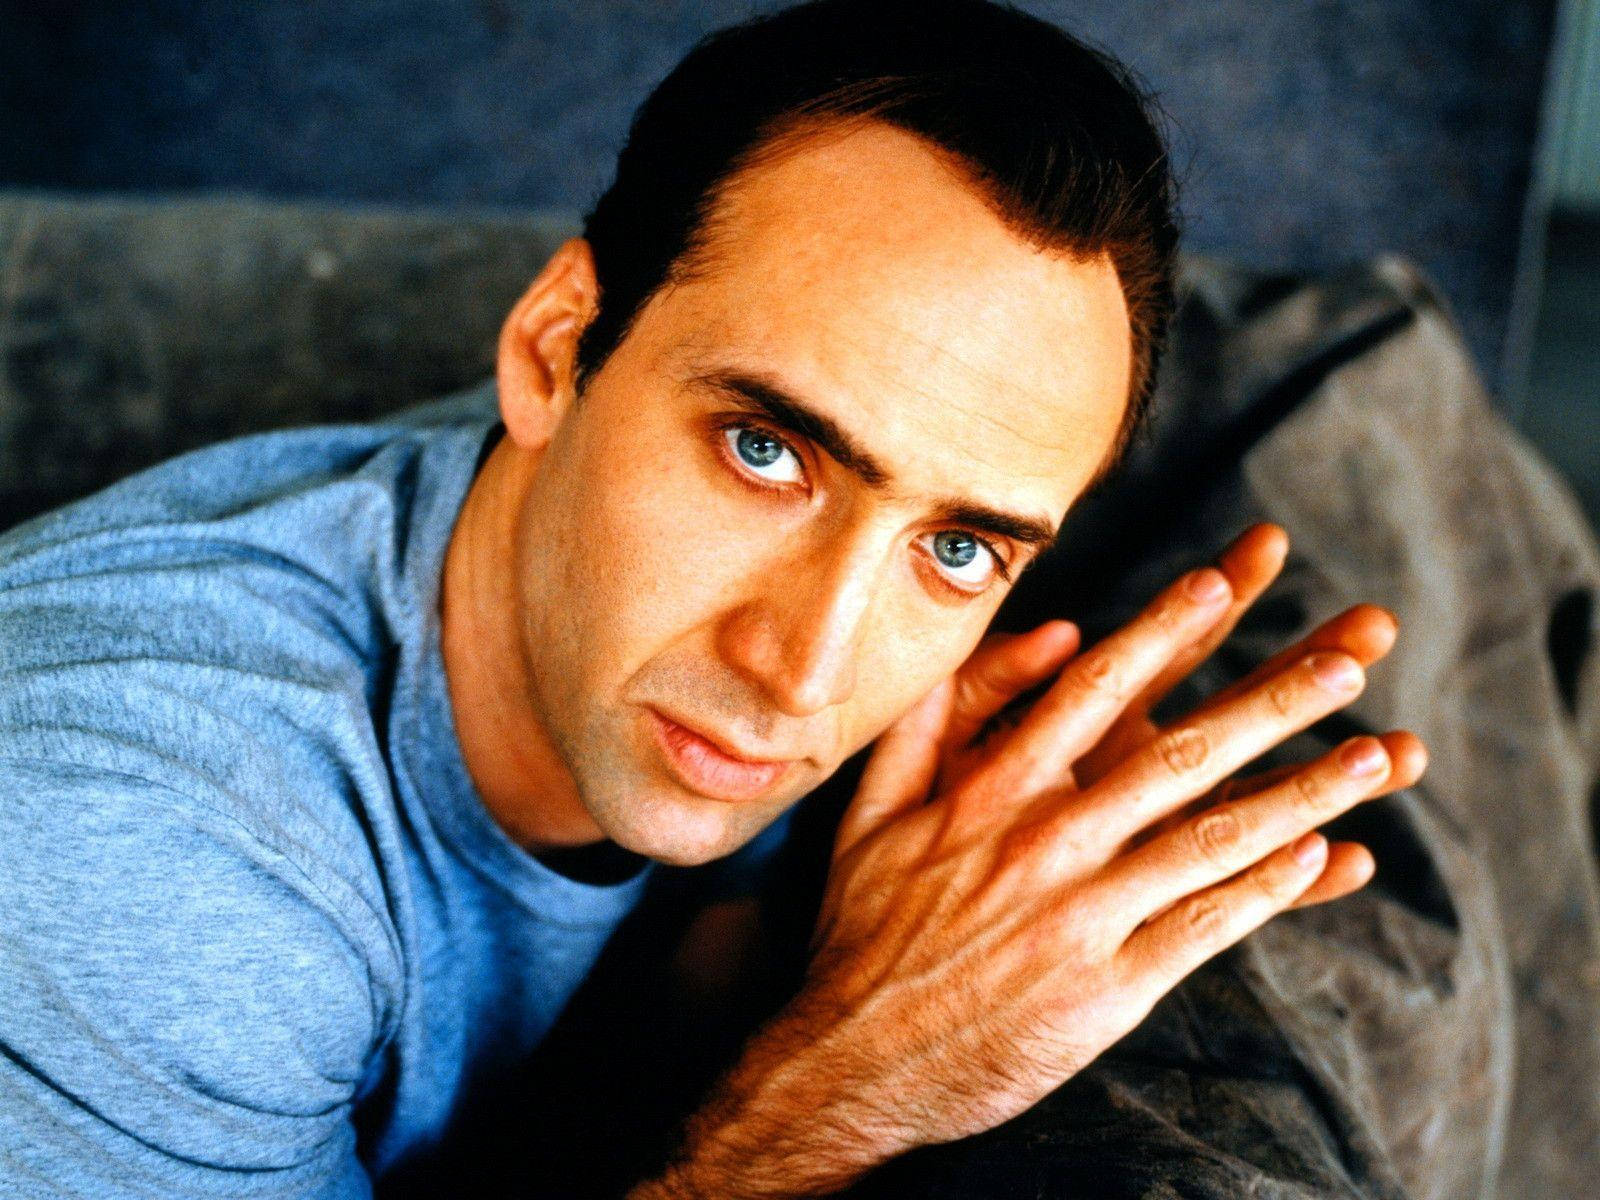 Nicolas Cage On The Couch Wallpaper